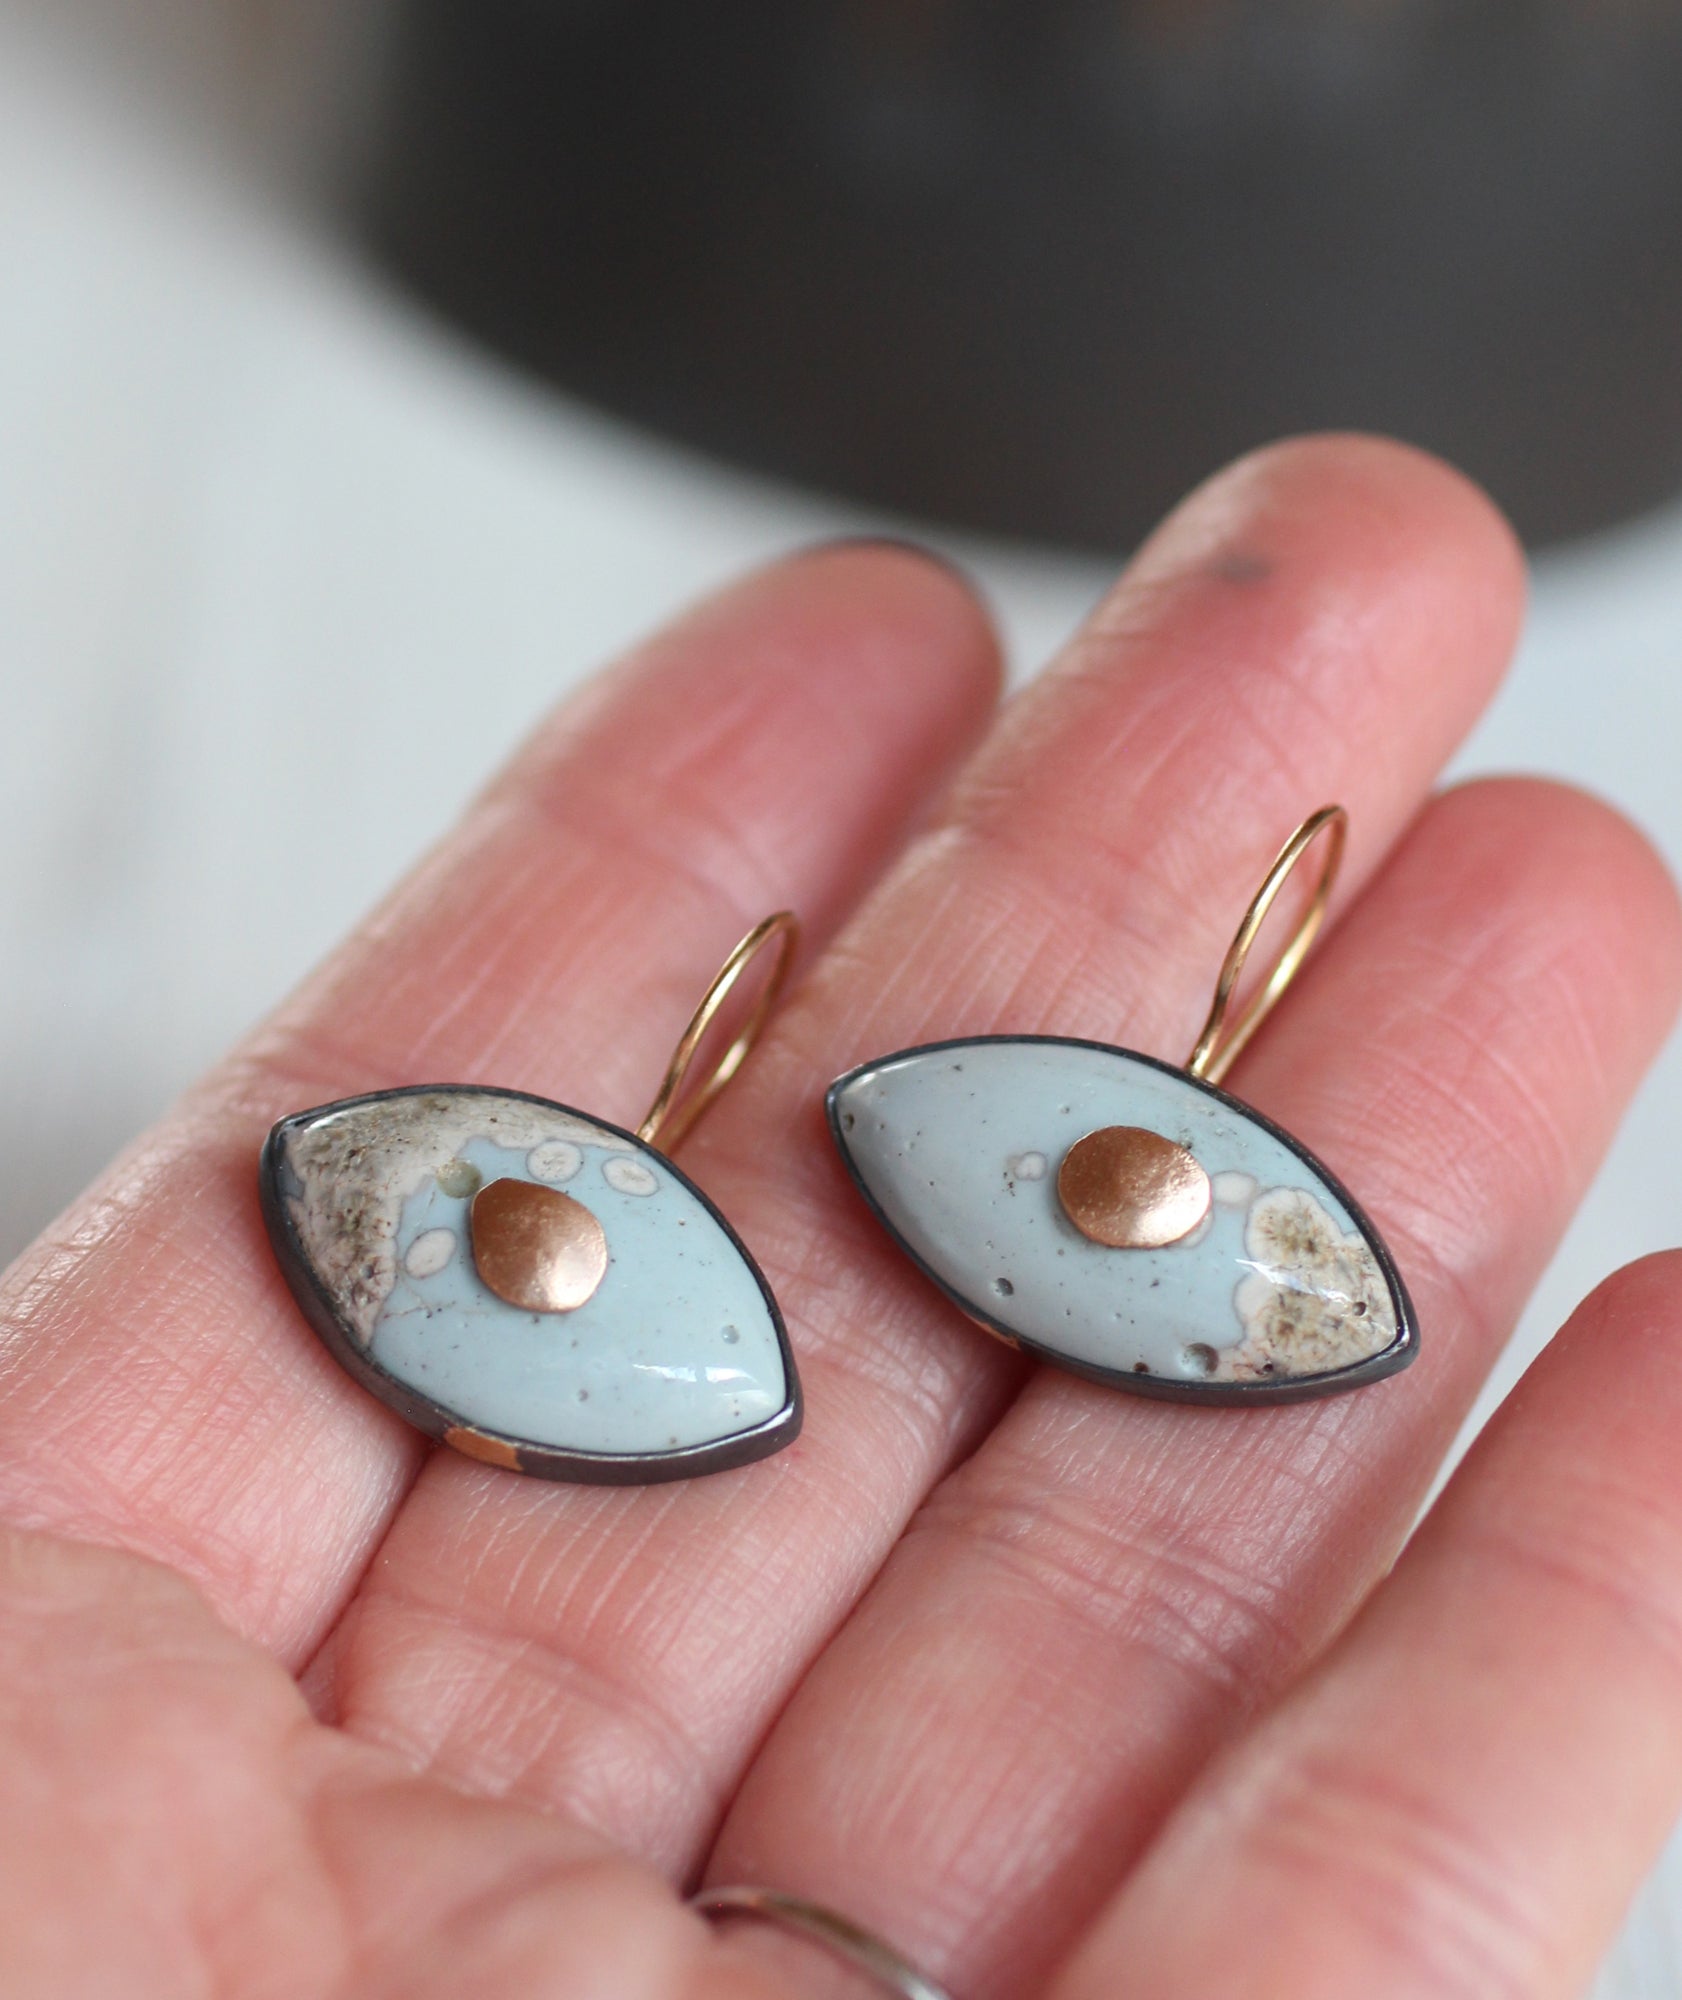 Protective Eye Earrings with 14k Gold